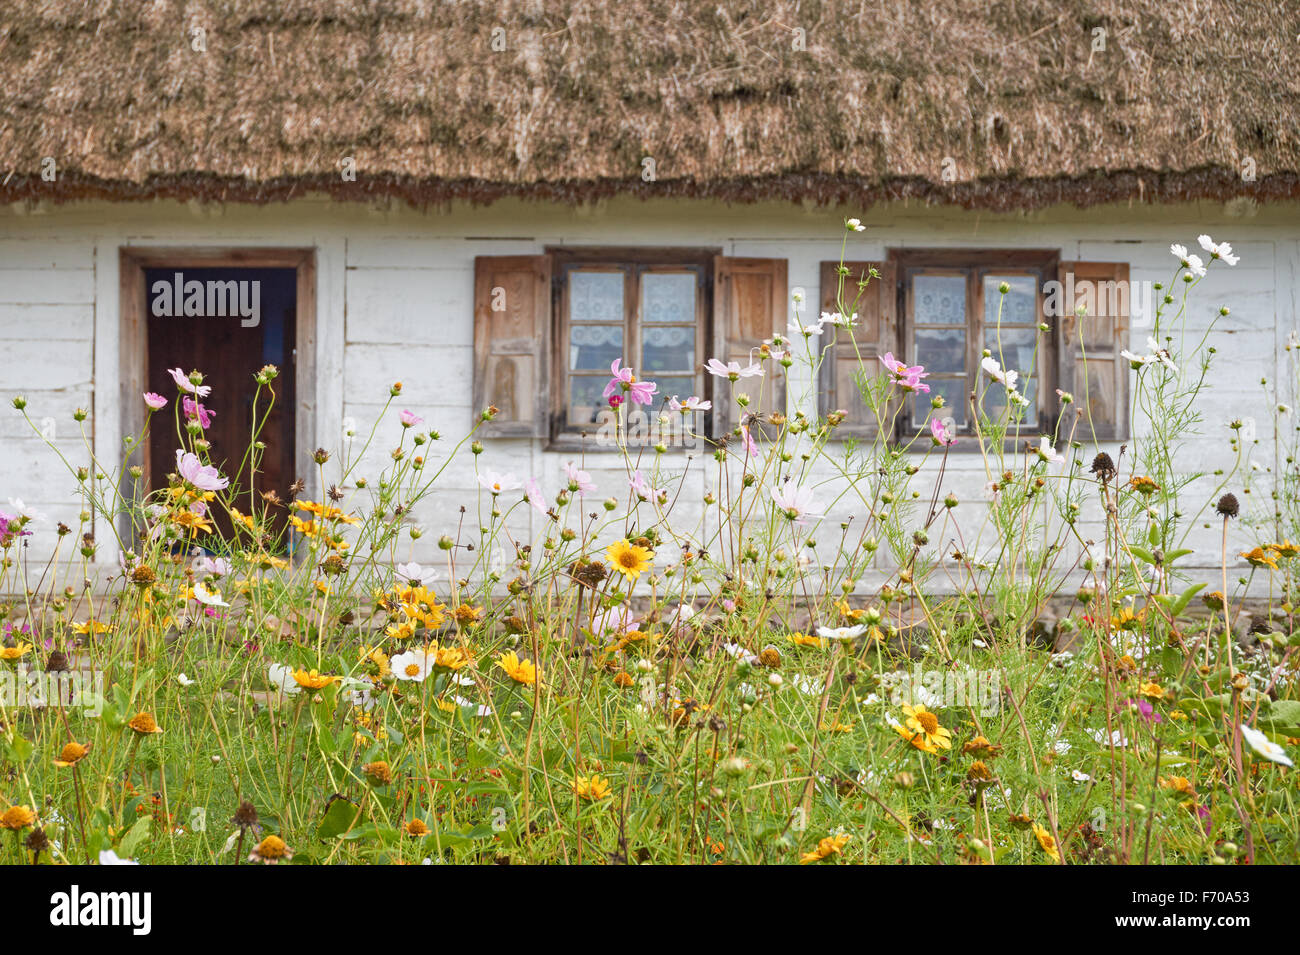 The Museum of the Mazovian Countryside in Sierpc, Poland. 19th century wooden thatched farmhouse. Stock Photo